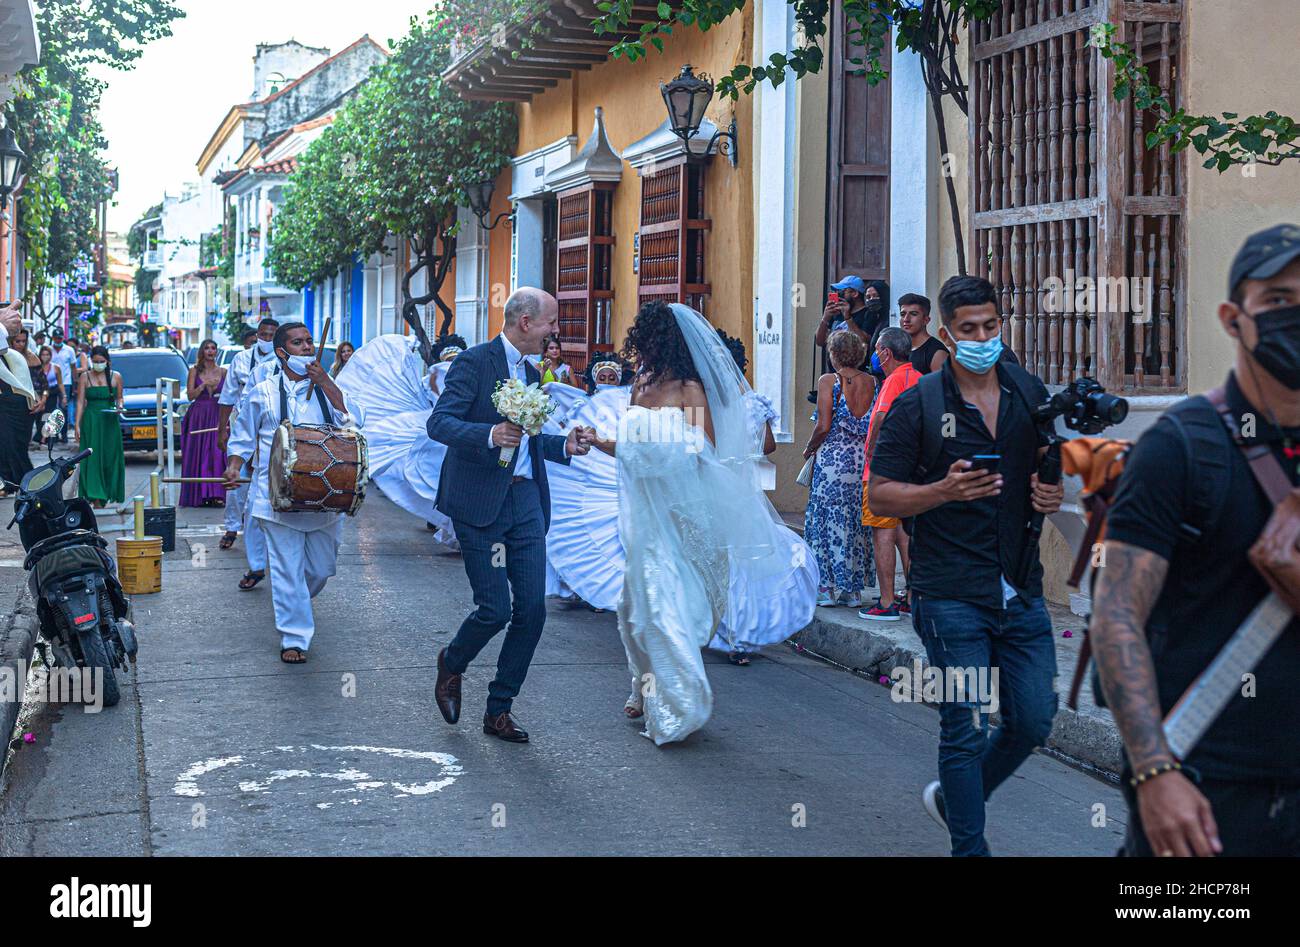 Newlywed couple celebrating their marriage dancing on the street, Cartagena de Indias, Colombia.. Stock Photo